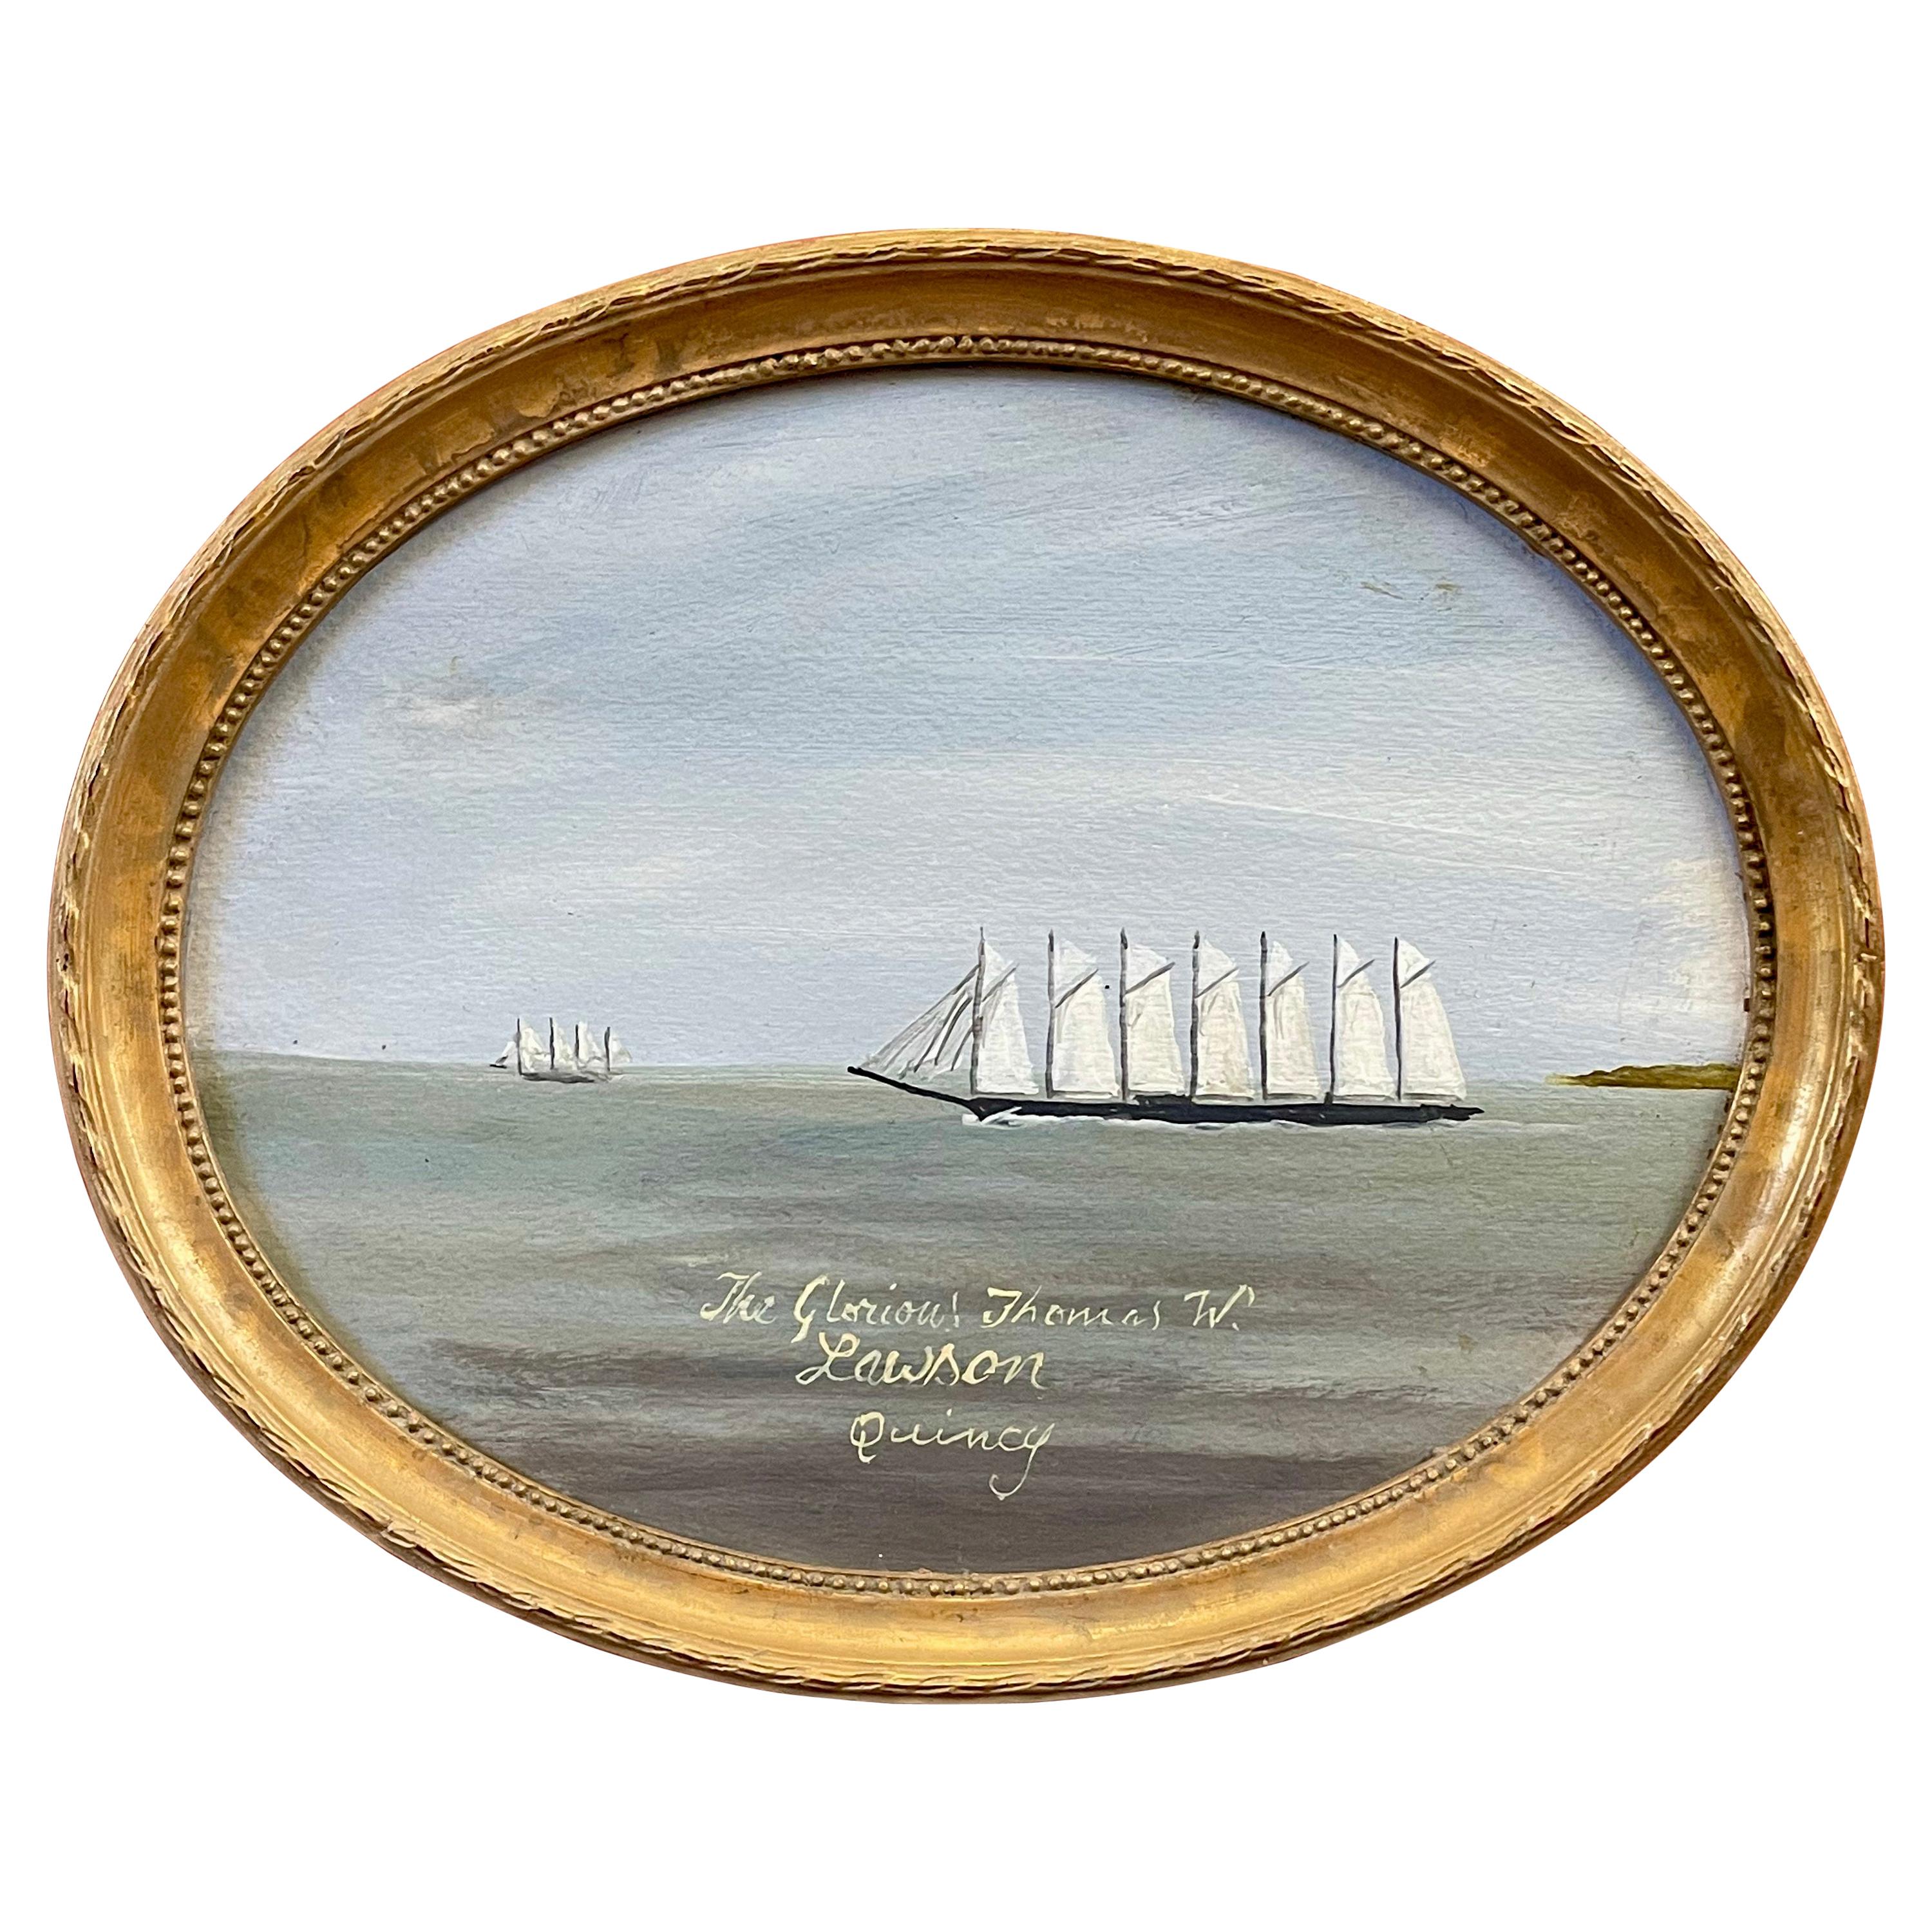 Oval Seascape Ship Painting of the "Thomas W. Lawson" Seven-Masted Schooner